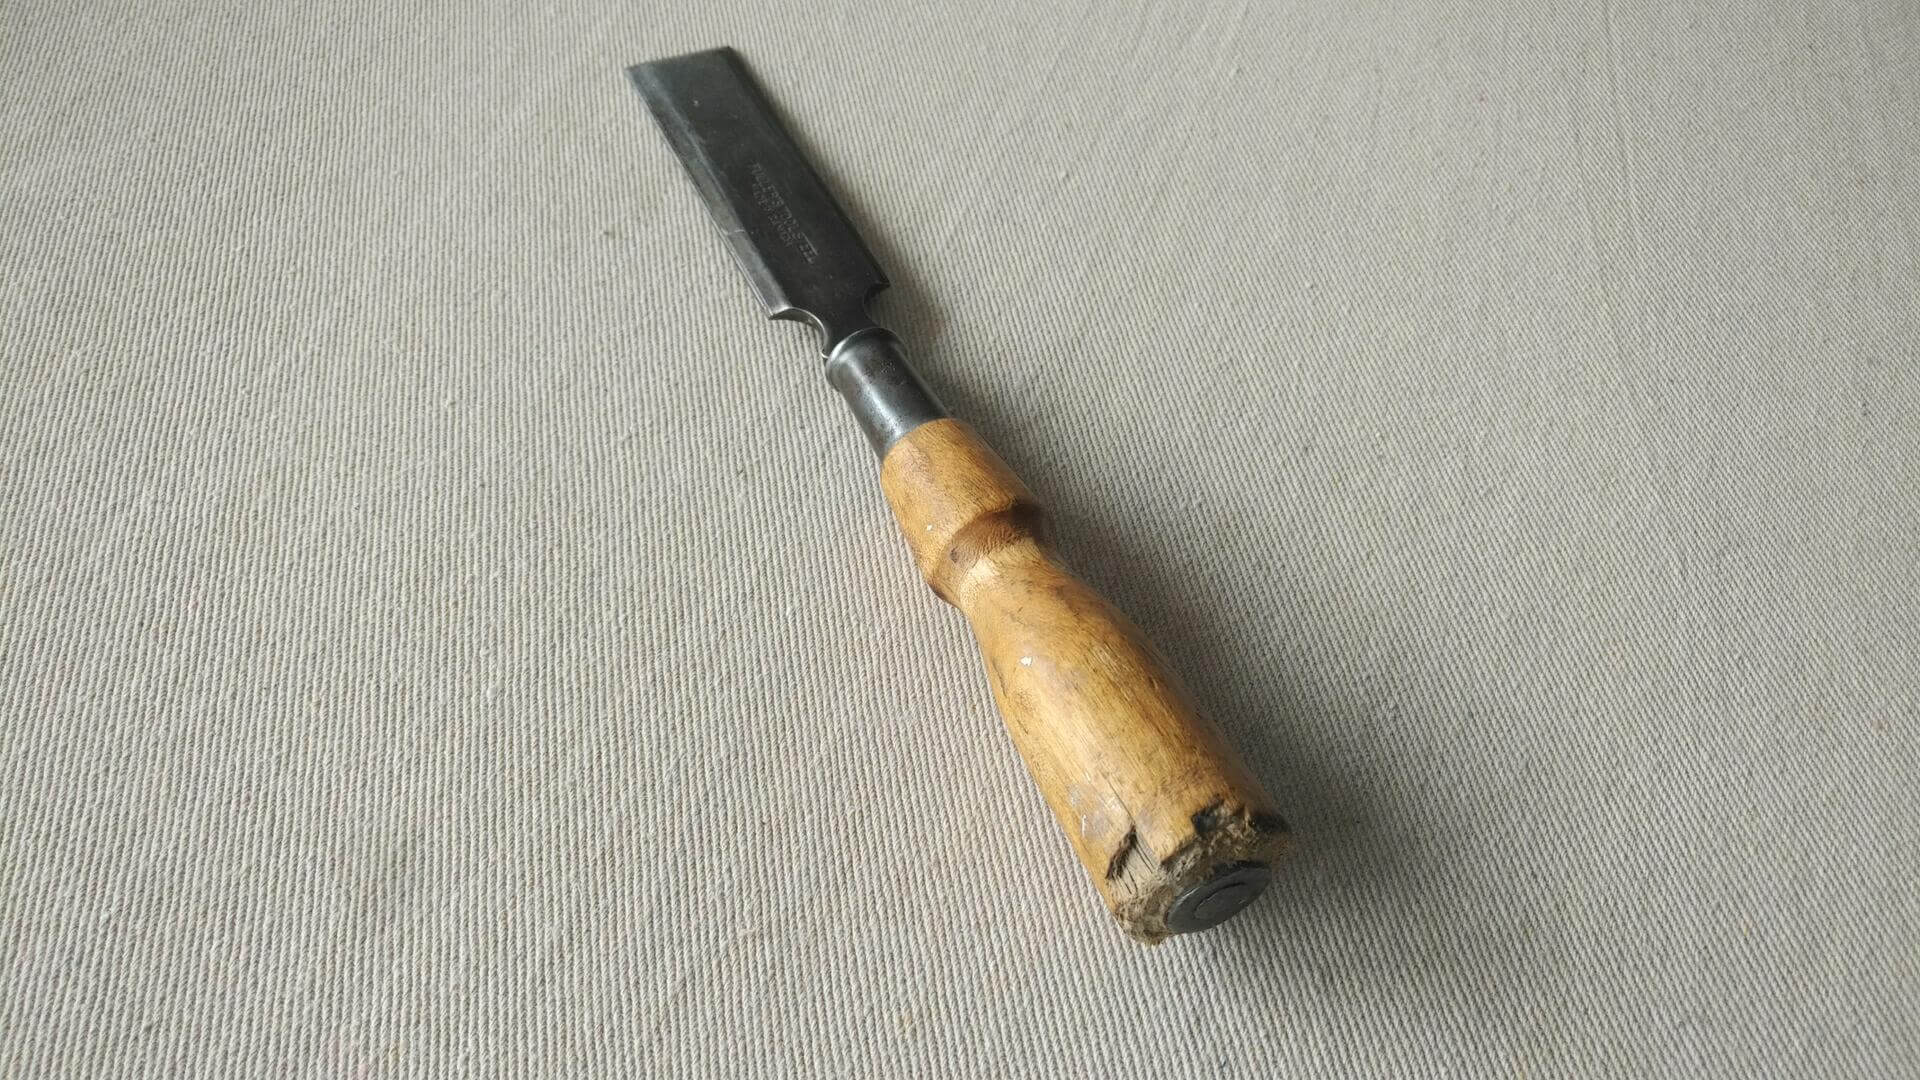 Rare antique wooden handle Fuller Tools 1" beveled edge carpentry chisel. Vintage made in Canada collectible woodworking and cabinet maker edge tools.